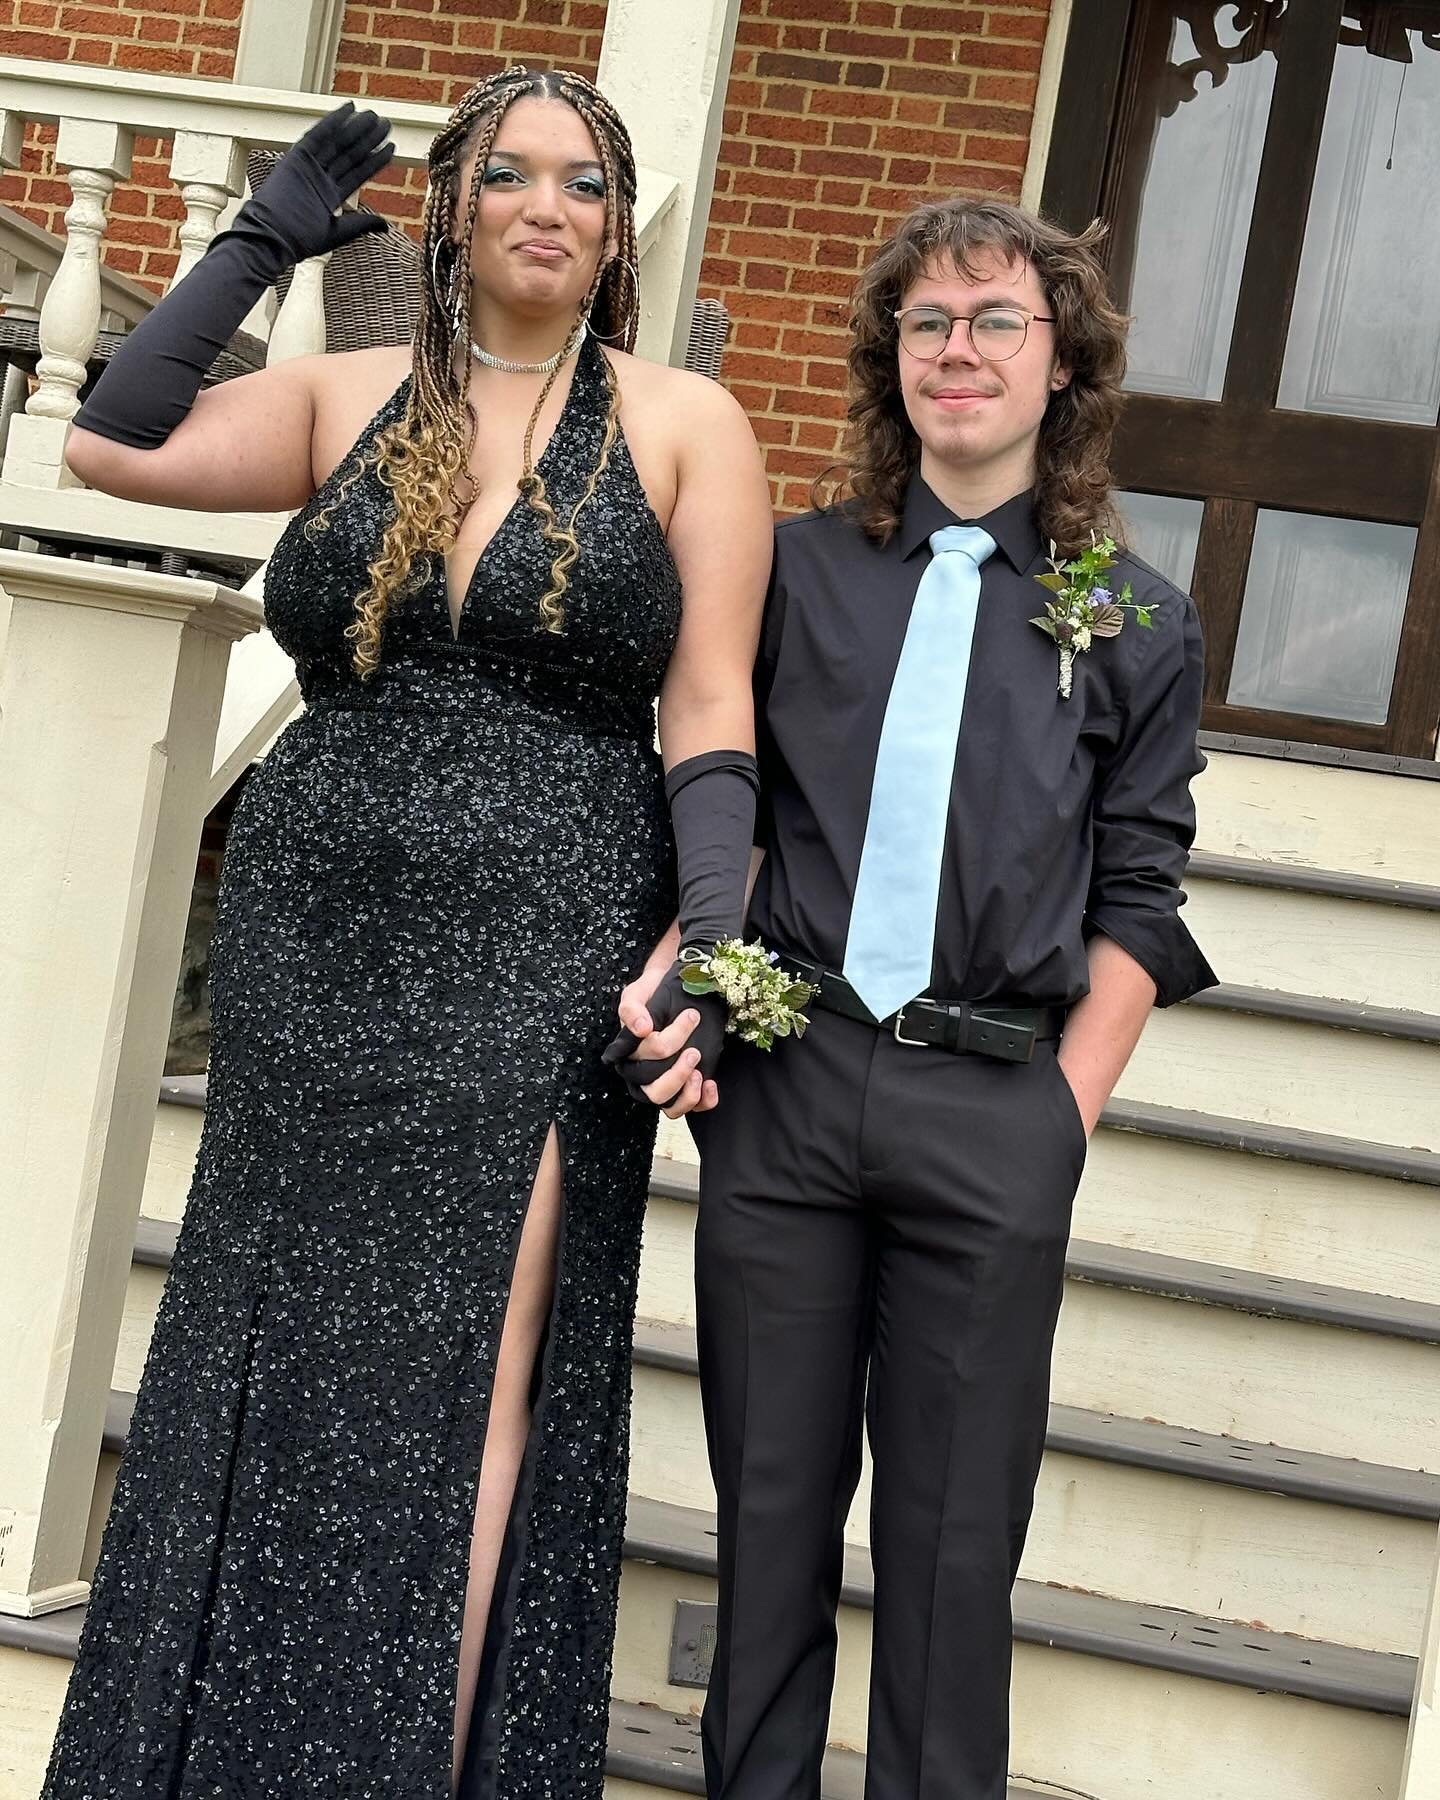 ✨

My favorite Rock n Roller &hellip;

Doing his prom thing &hellip; with his lovely date &hellip;.
🙌

✨

#flourishroot #prom #thesearethedays